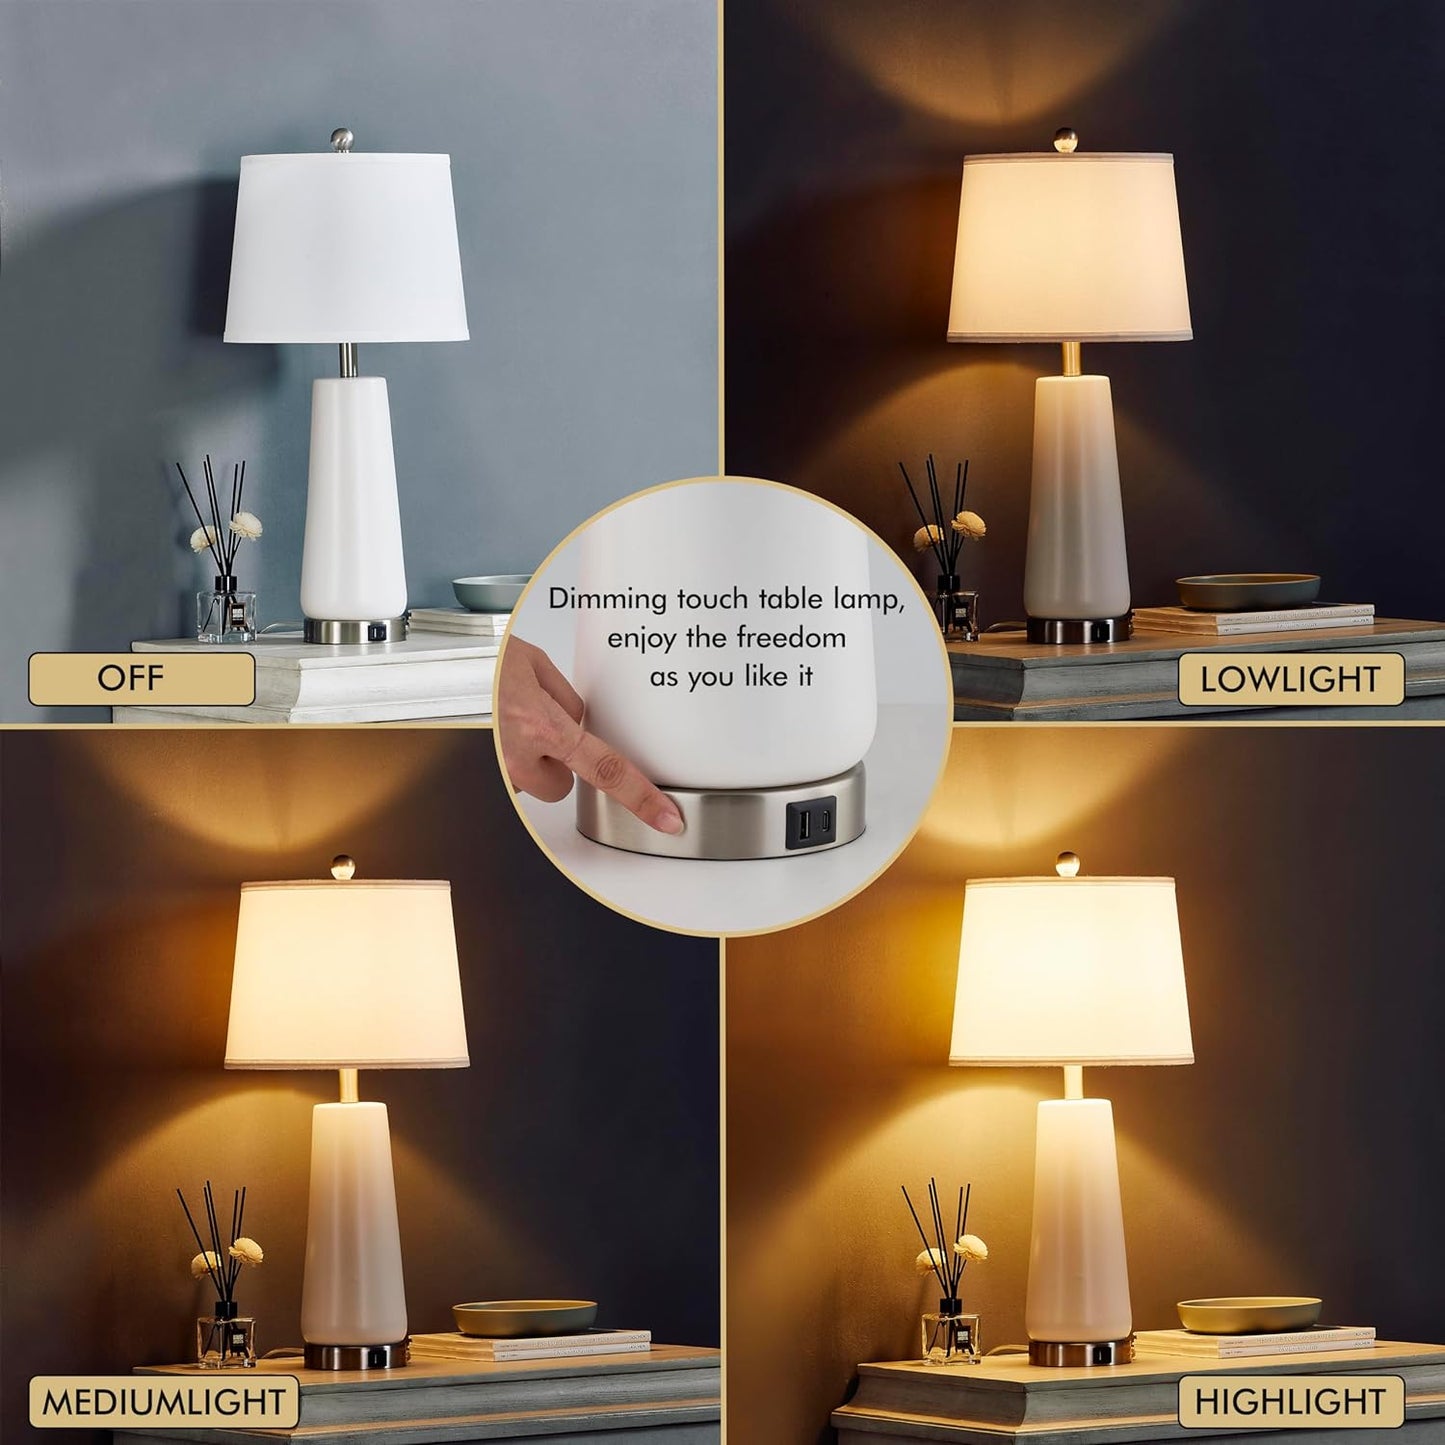 Bedside Lamps Set of 2 - Touch Control 27" Table Lamp for Bedroom 3 Way Dimmable Ceramic Nightstand Lamp with White Fabric Shade for Living Room, Dorm, Home and Office (2 LED Bulb Included)